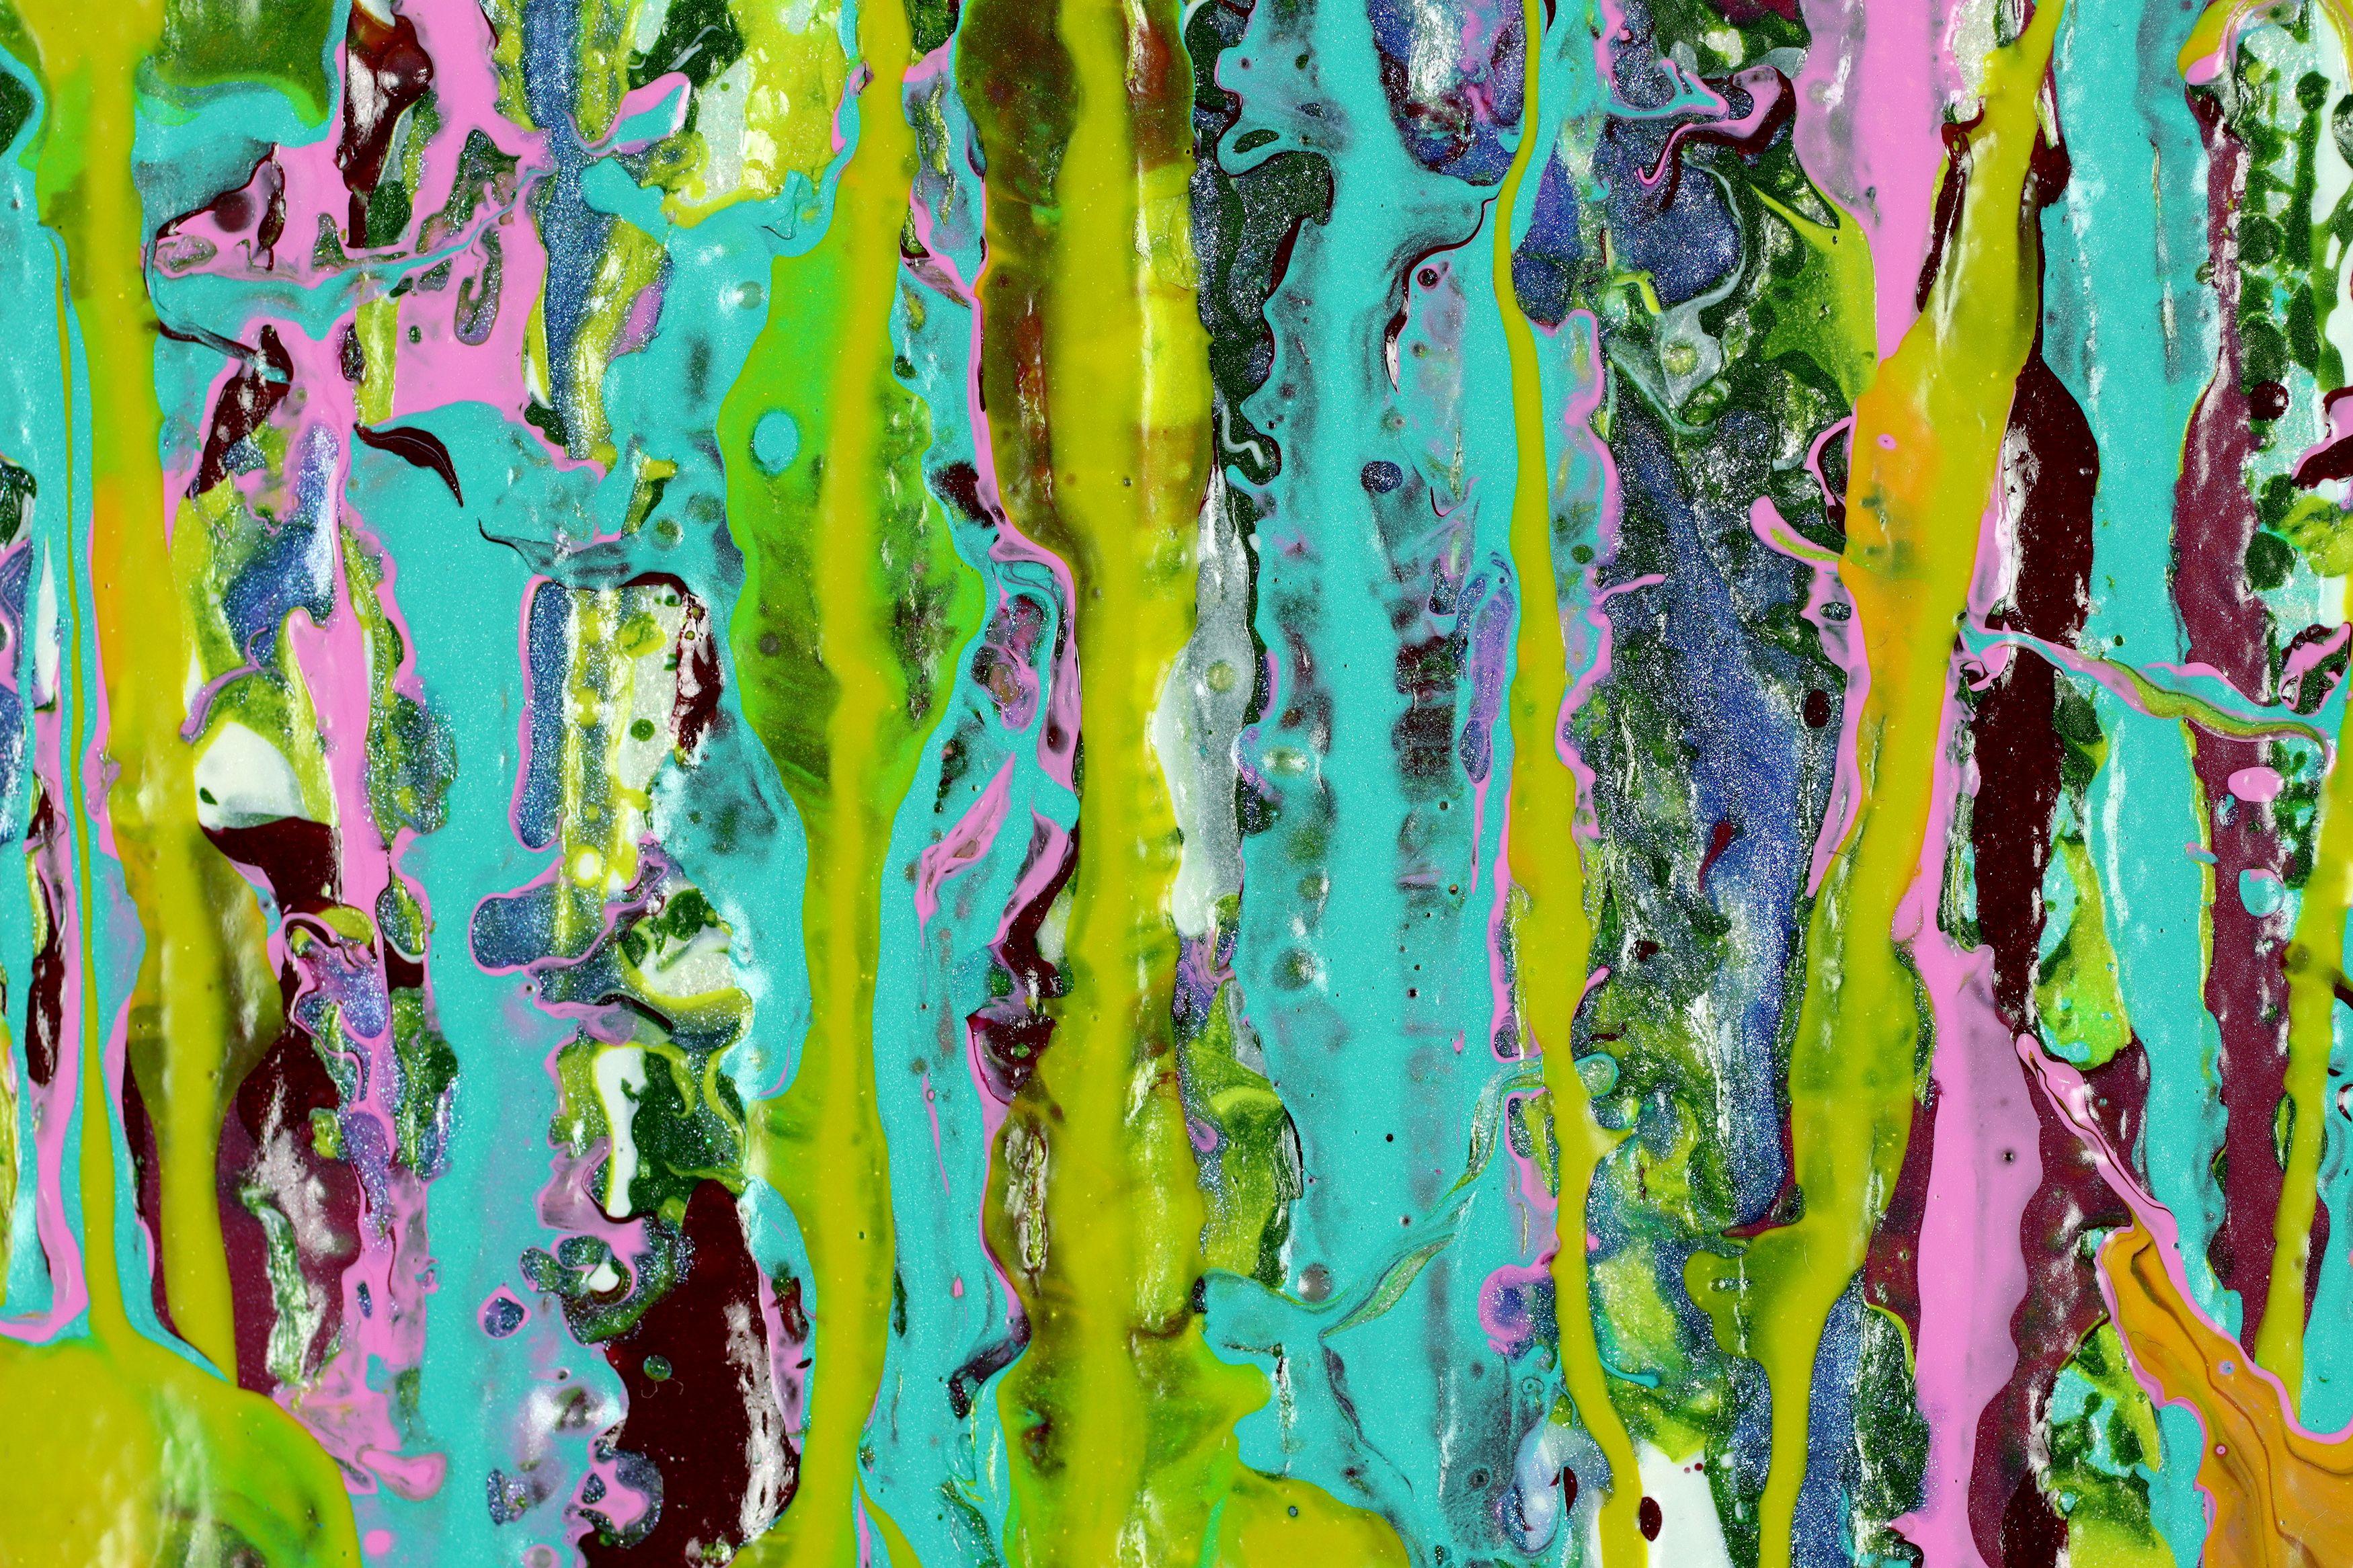 Expressive modern abstract, bold full of life, gloss and shimmer! inspired by nature. Shades of iridescent silver, light blue, and shades of pink, yellow green, over Iridescent light teal and silver background. signed in front.    I include a